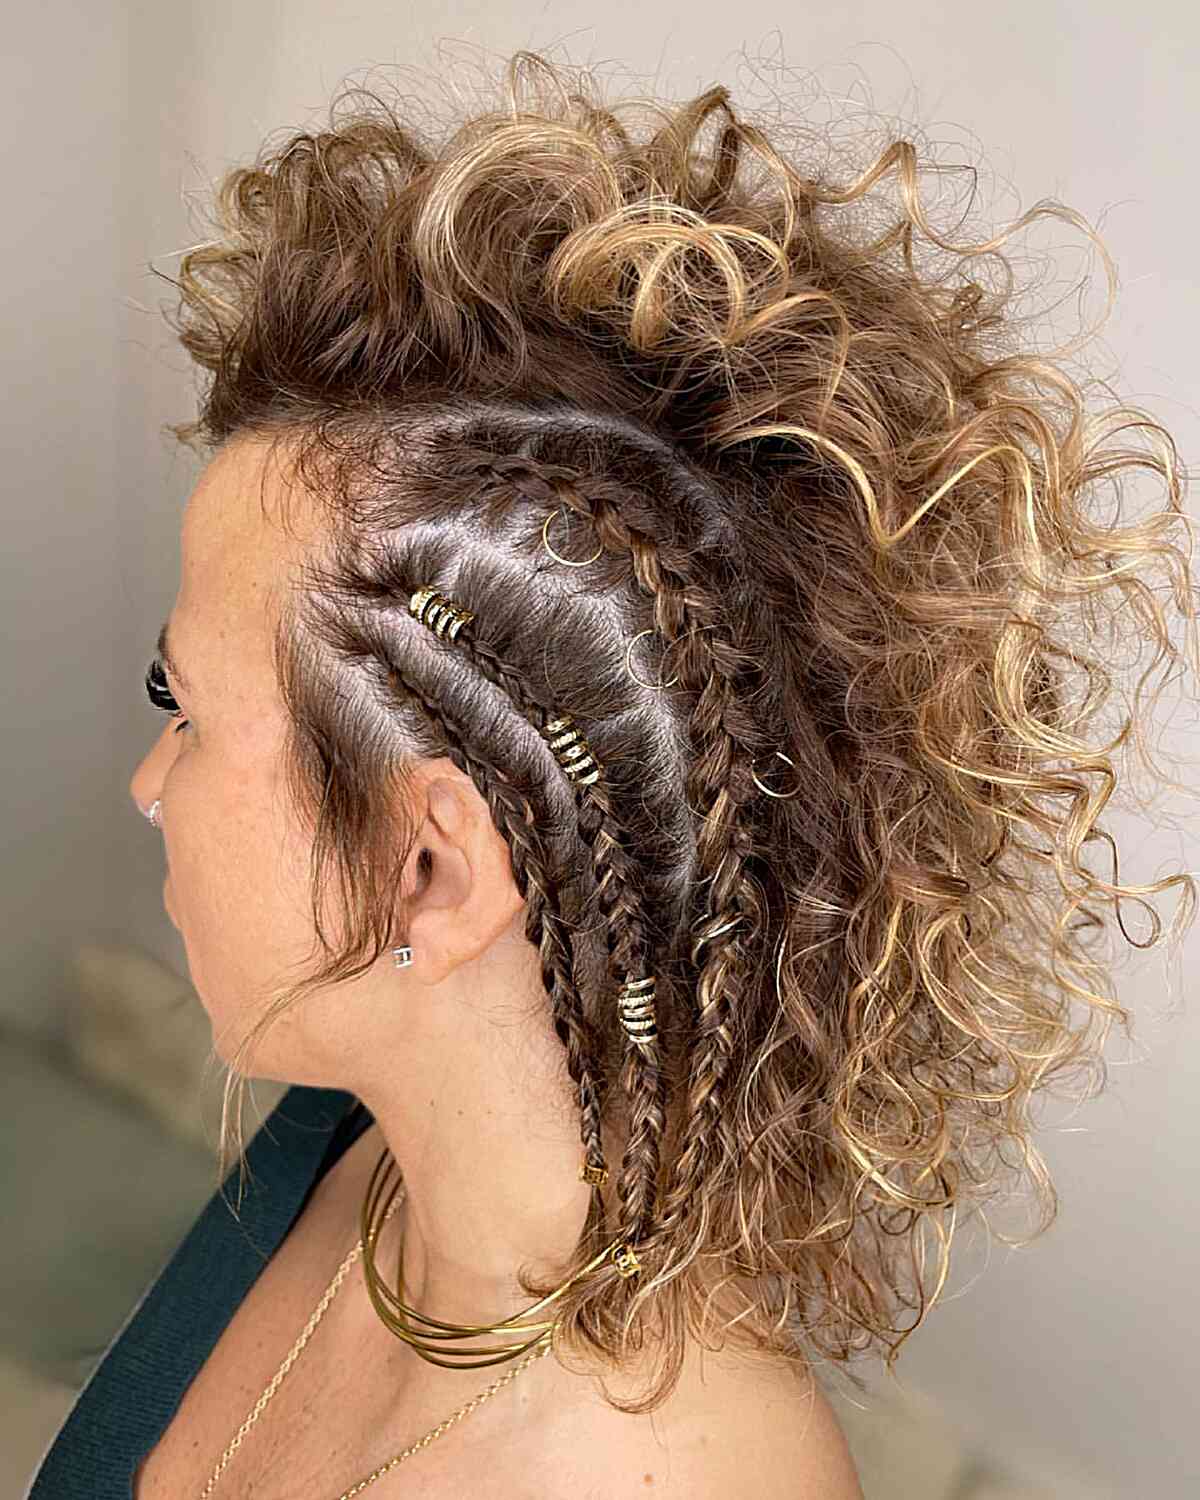 12 Coolest Viking Hairstyles Women in 2023 - The Trend Spotter